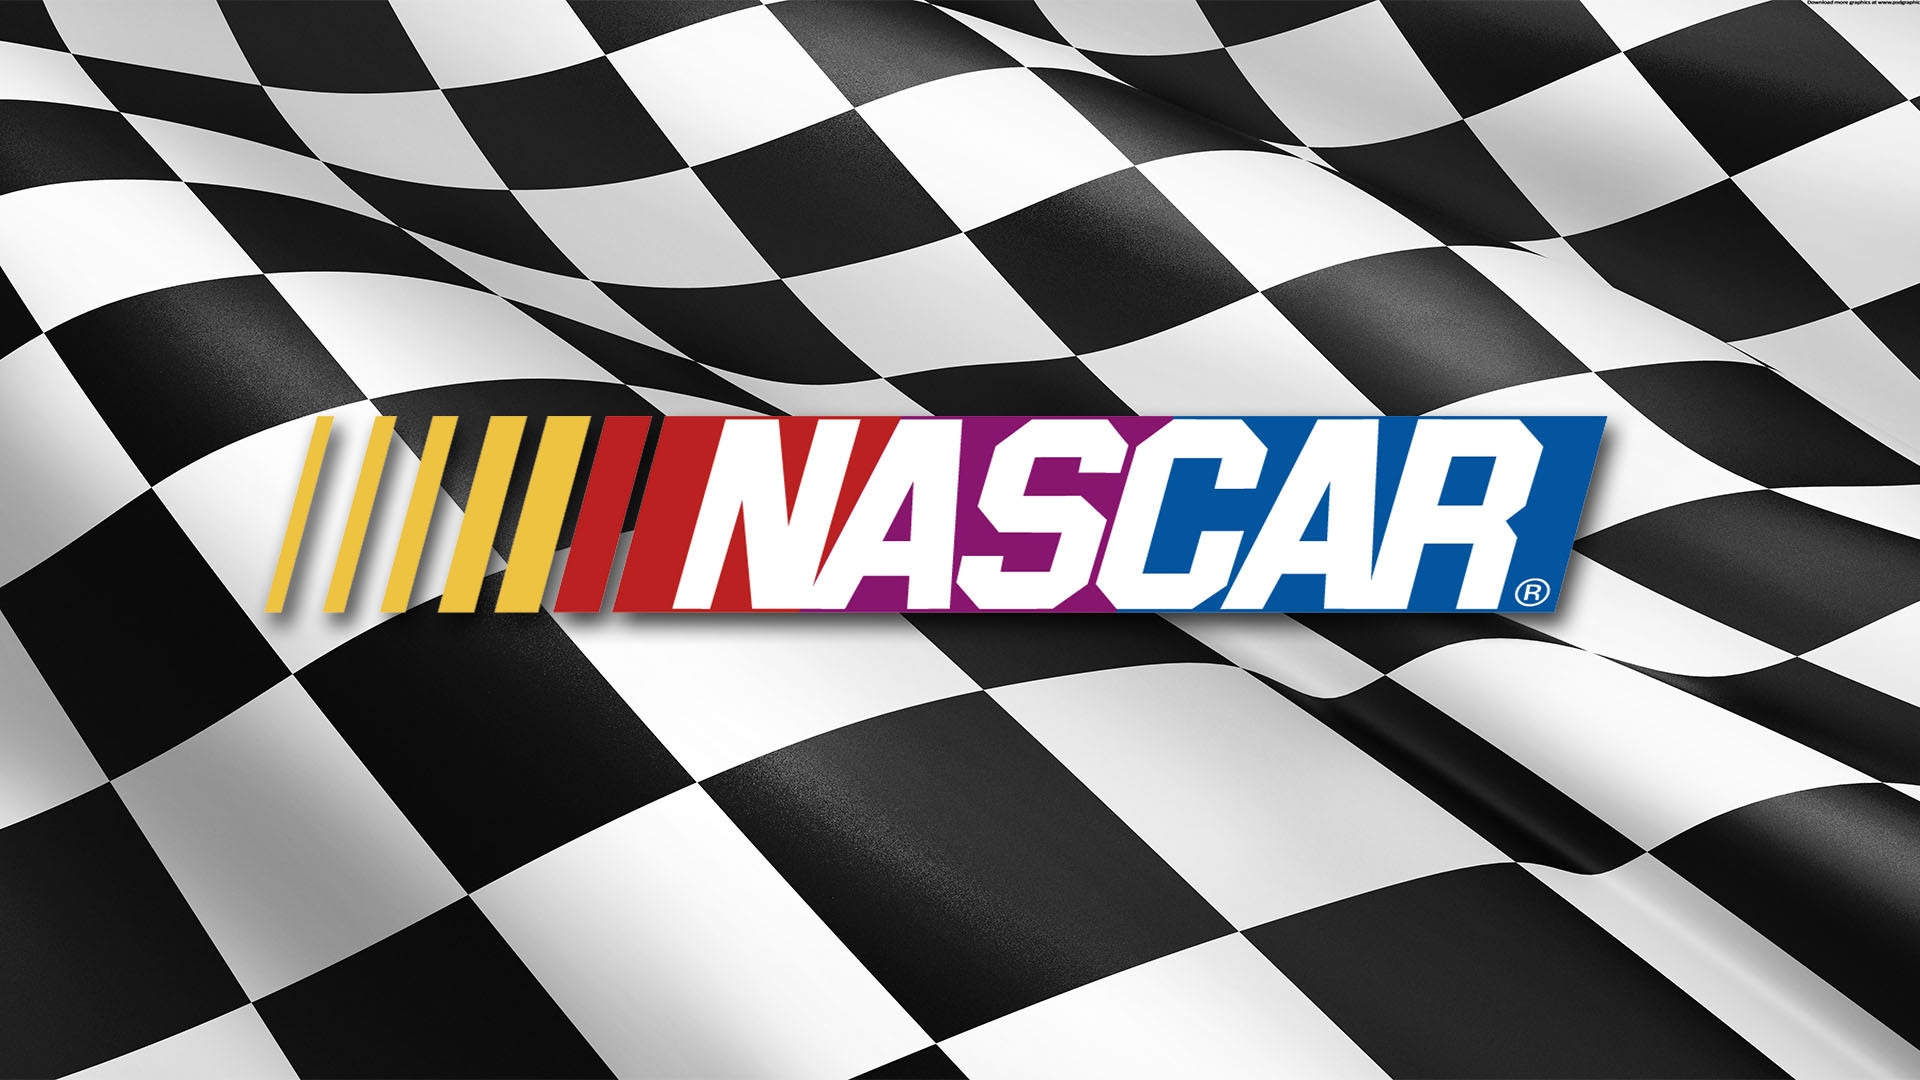 Nascar Wallpaper Image Photos Pictures Background